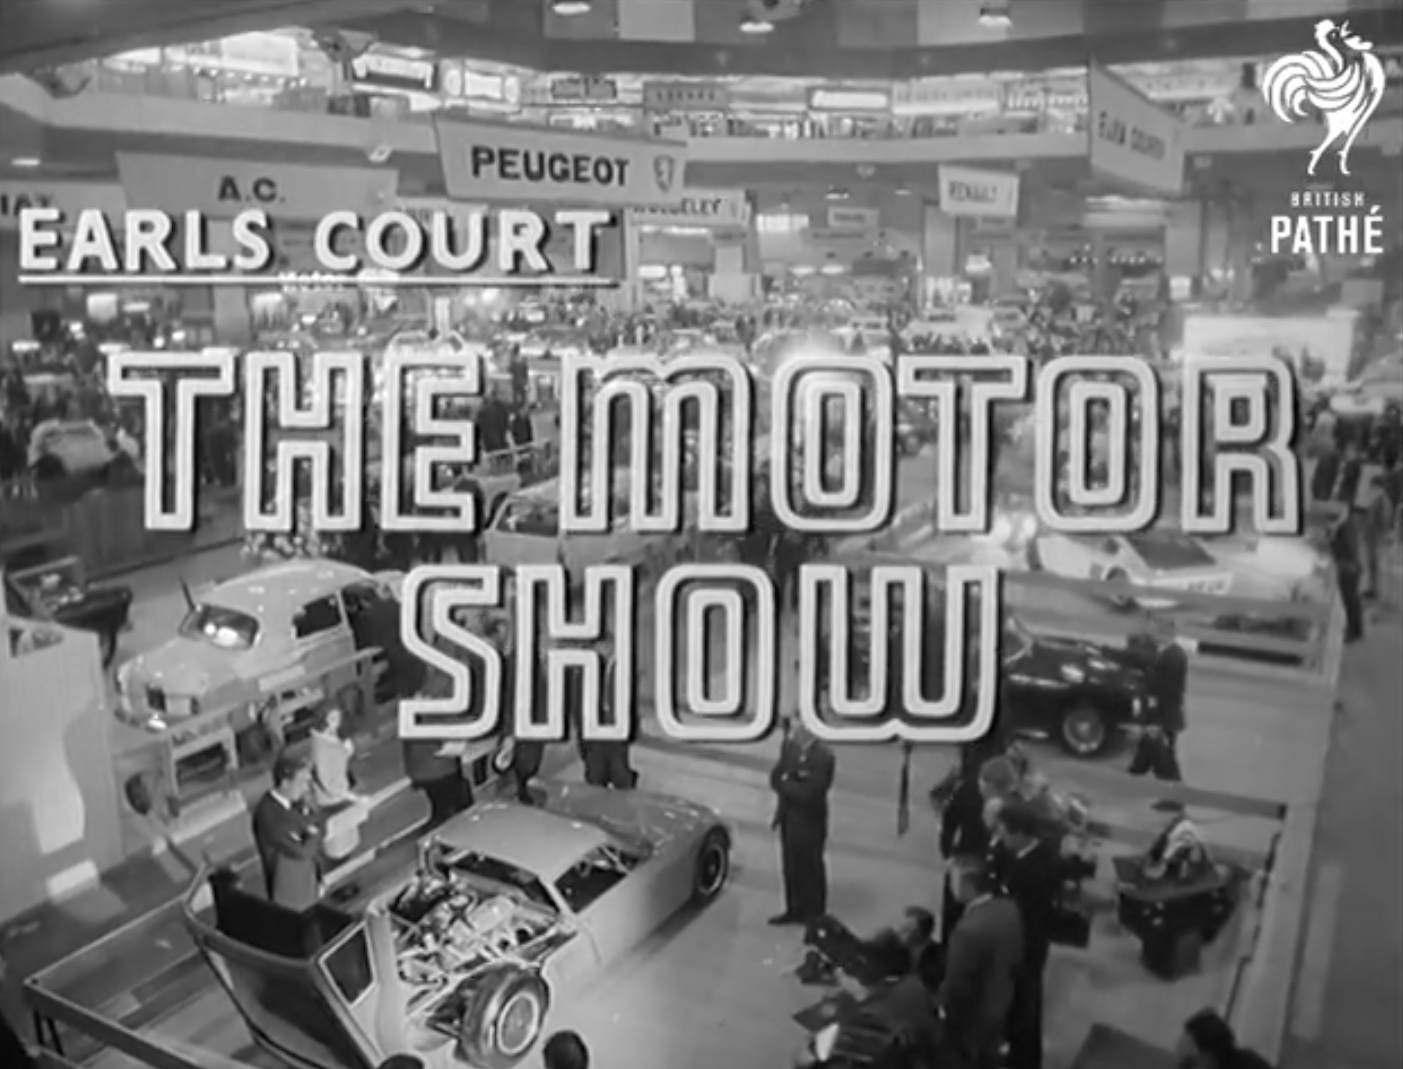 earls court
                      motor chow 1964